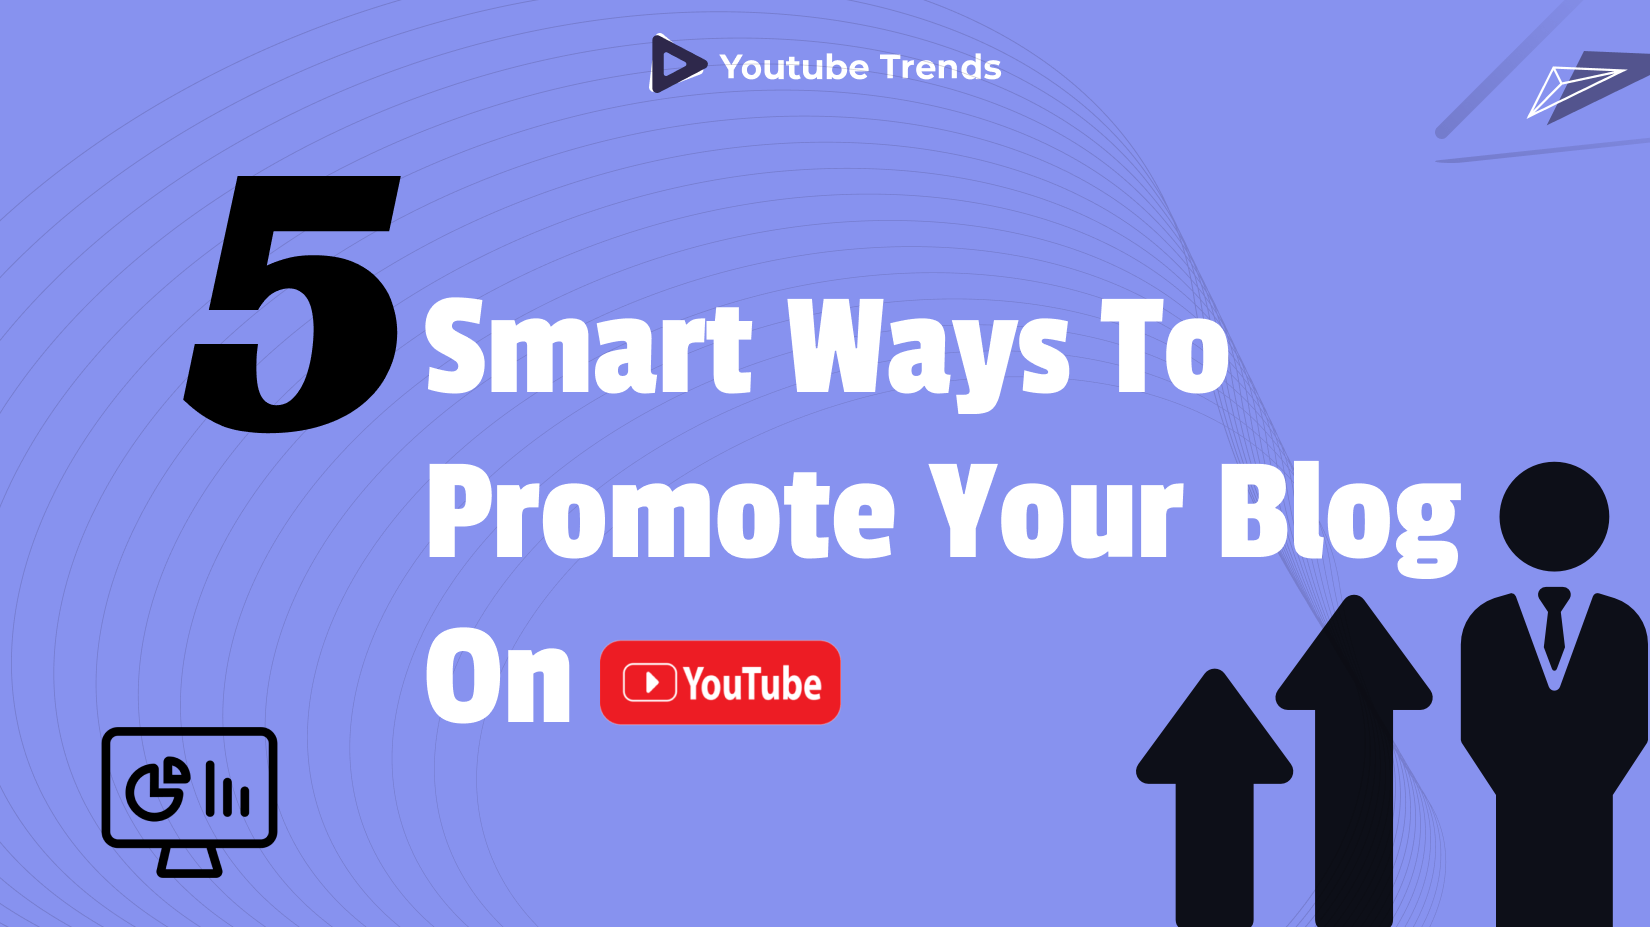 5 Smart Ways To Promote Your Blog On YouTube